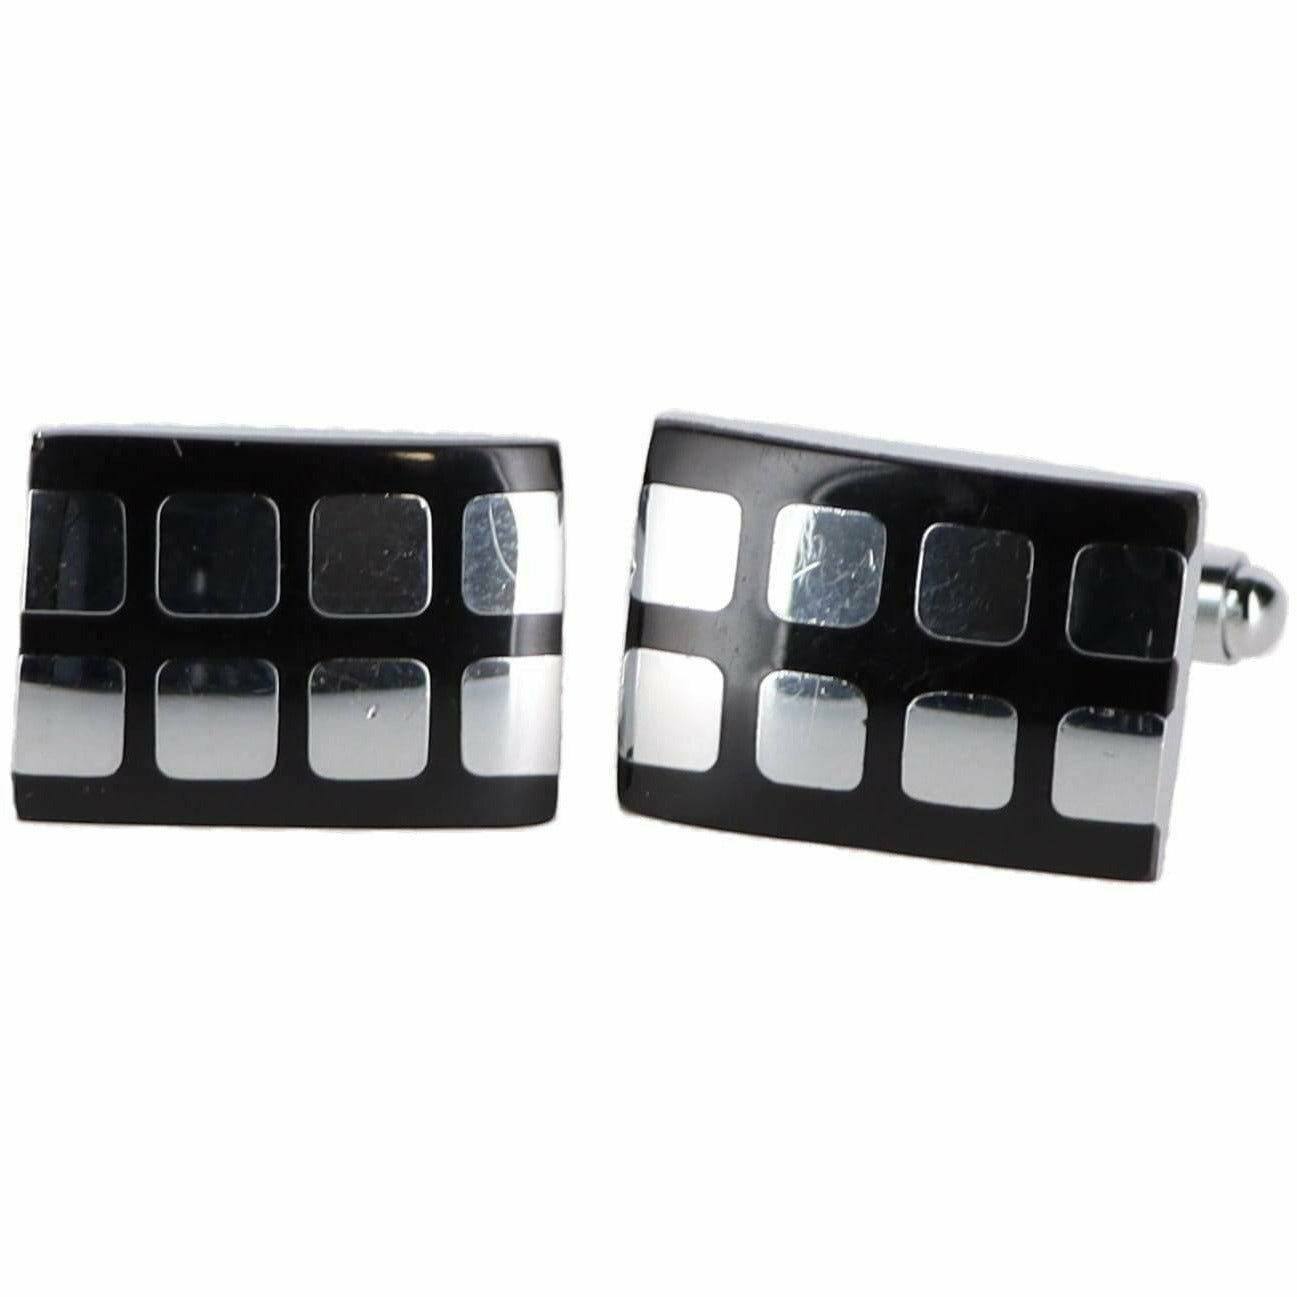 Vittorio Vico Gold & Silver Novelty Cufflinks (CL5000 Series) by Classy Cufflinks